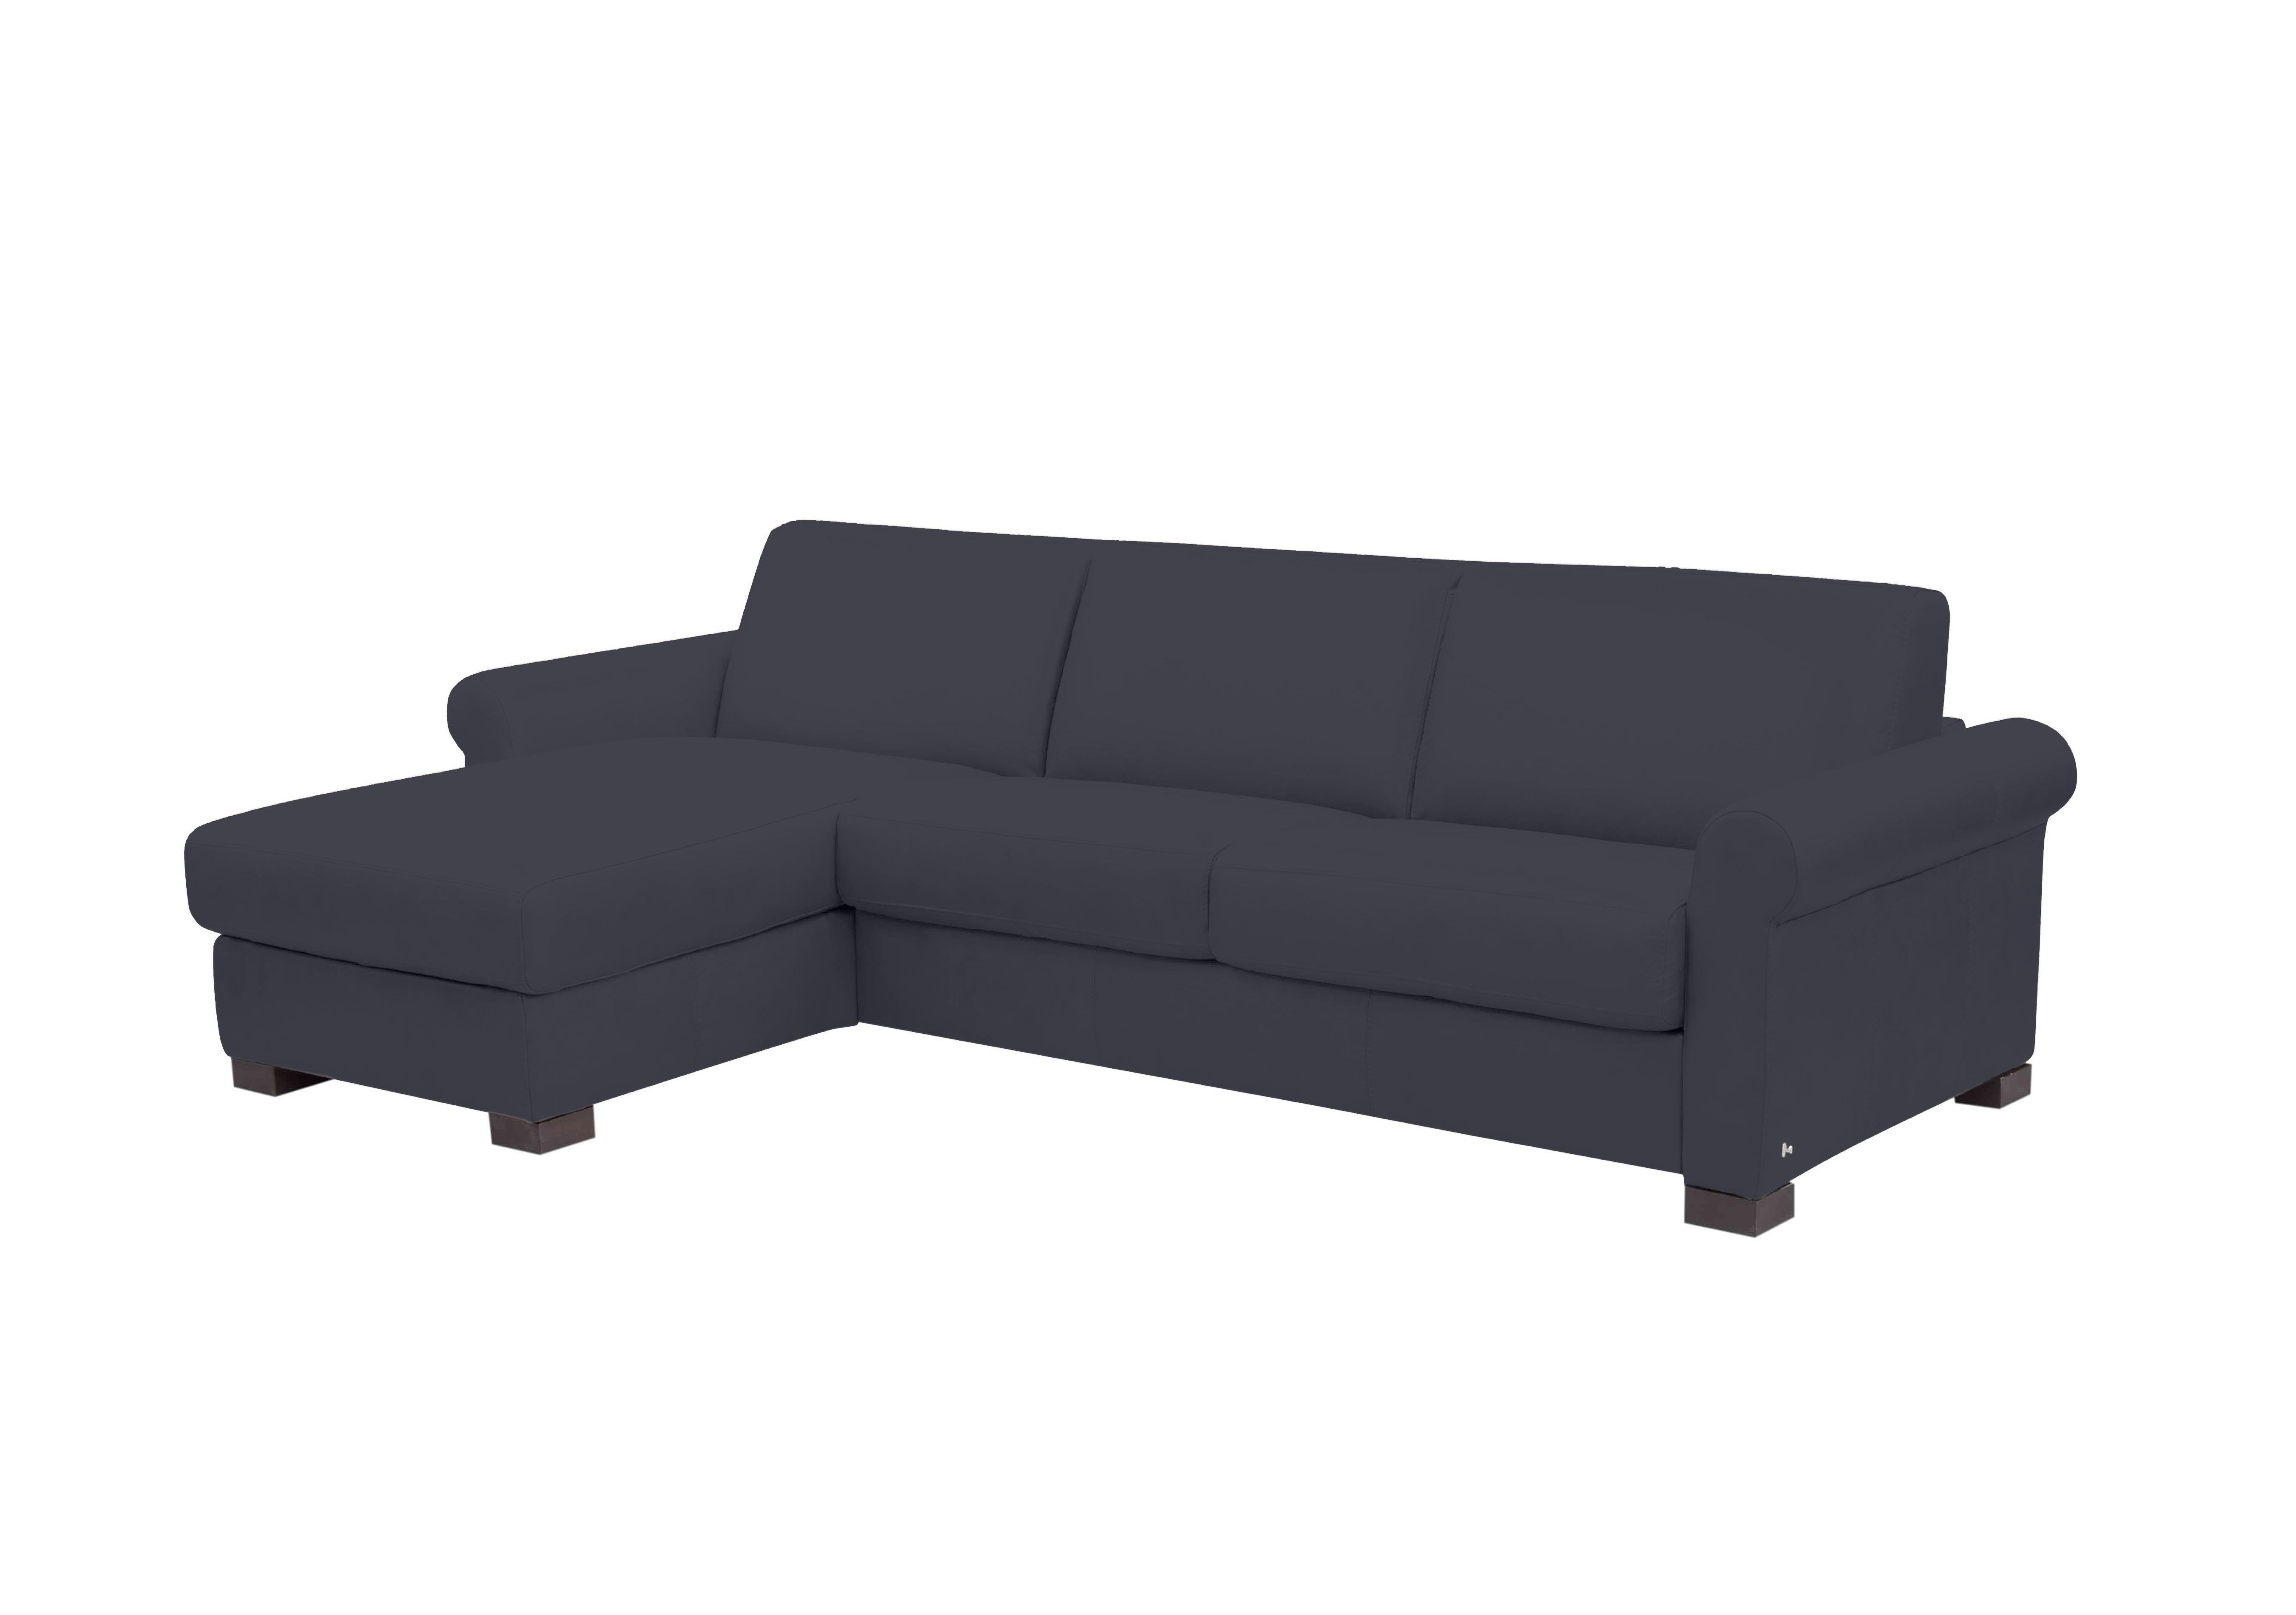 Alcova 3 Seater Leather Sofa Bed with Storage Chaise with Scroll Arms in Torello Blu 81 on Furniture Village